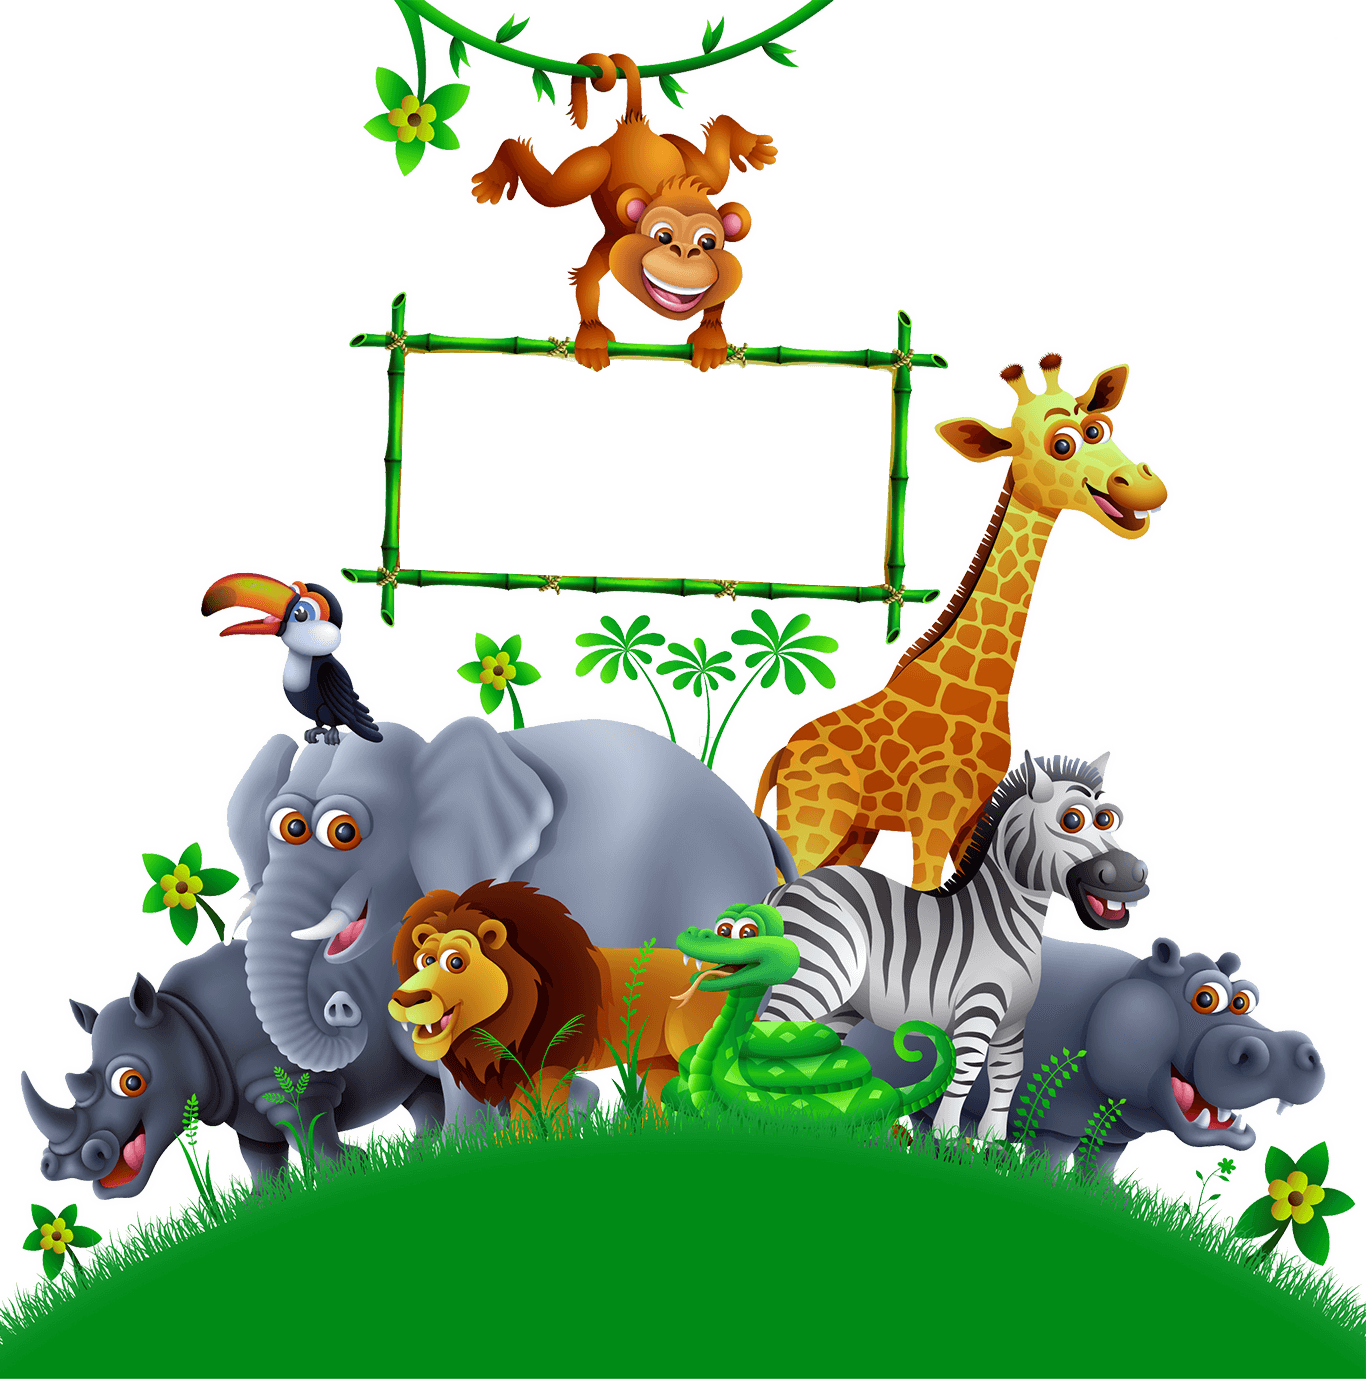 playground clipart day time activity